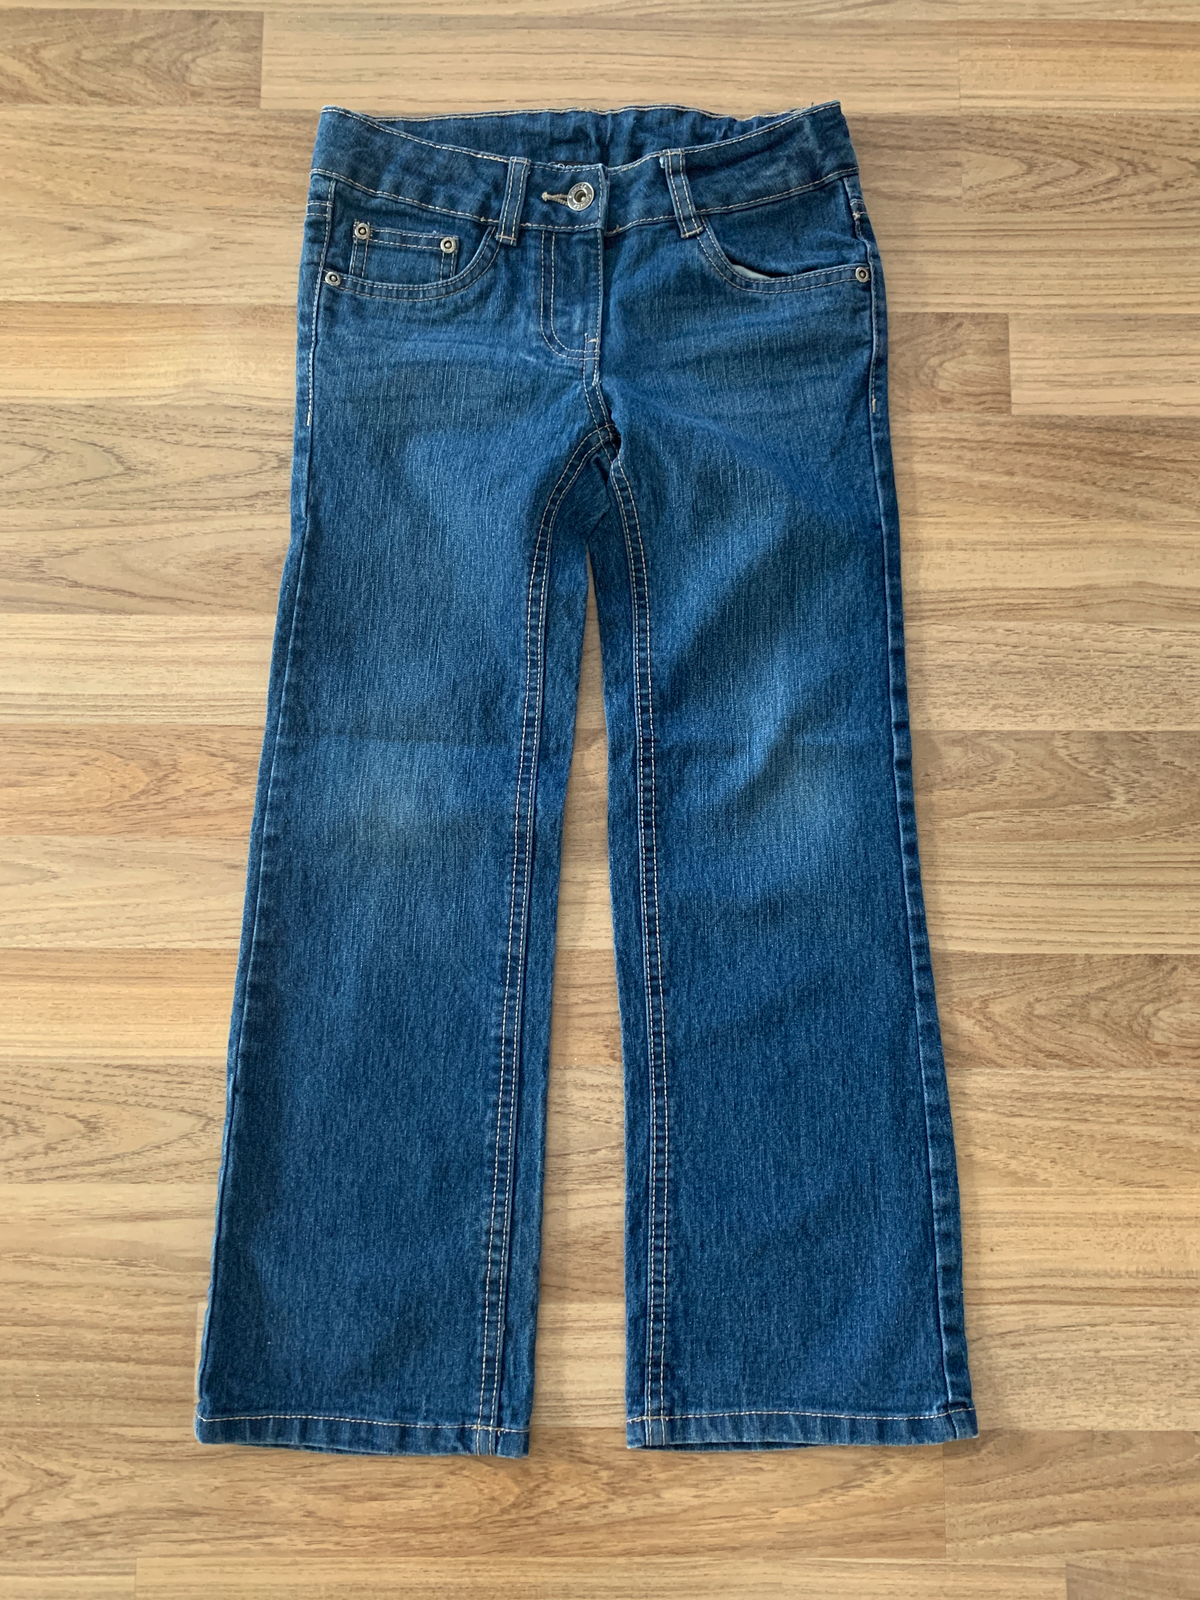 Jeans (Girls Size 7)